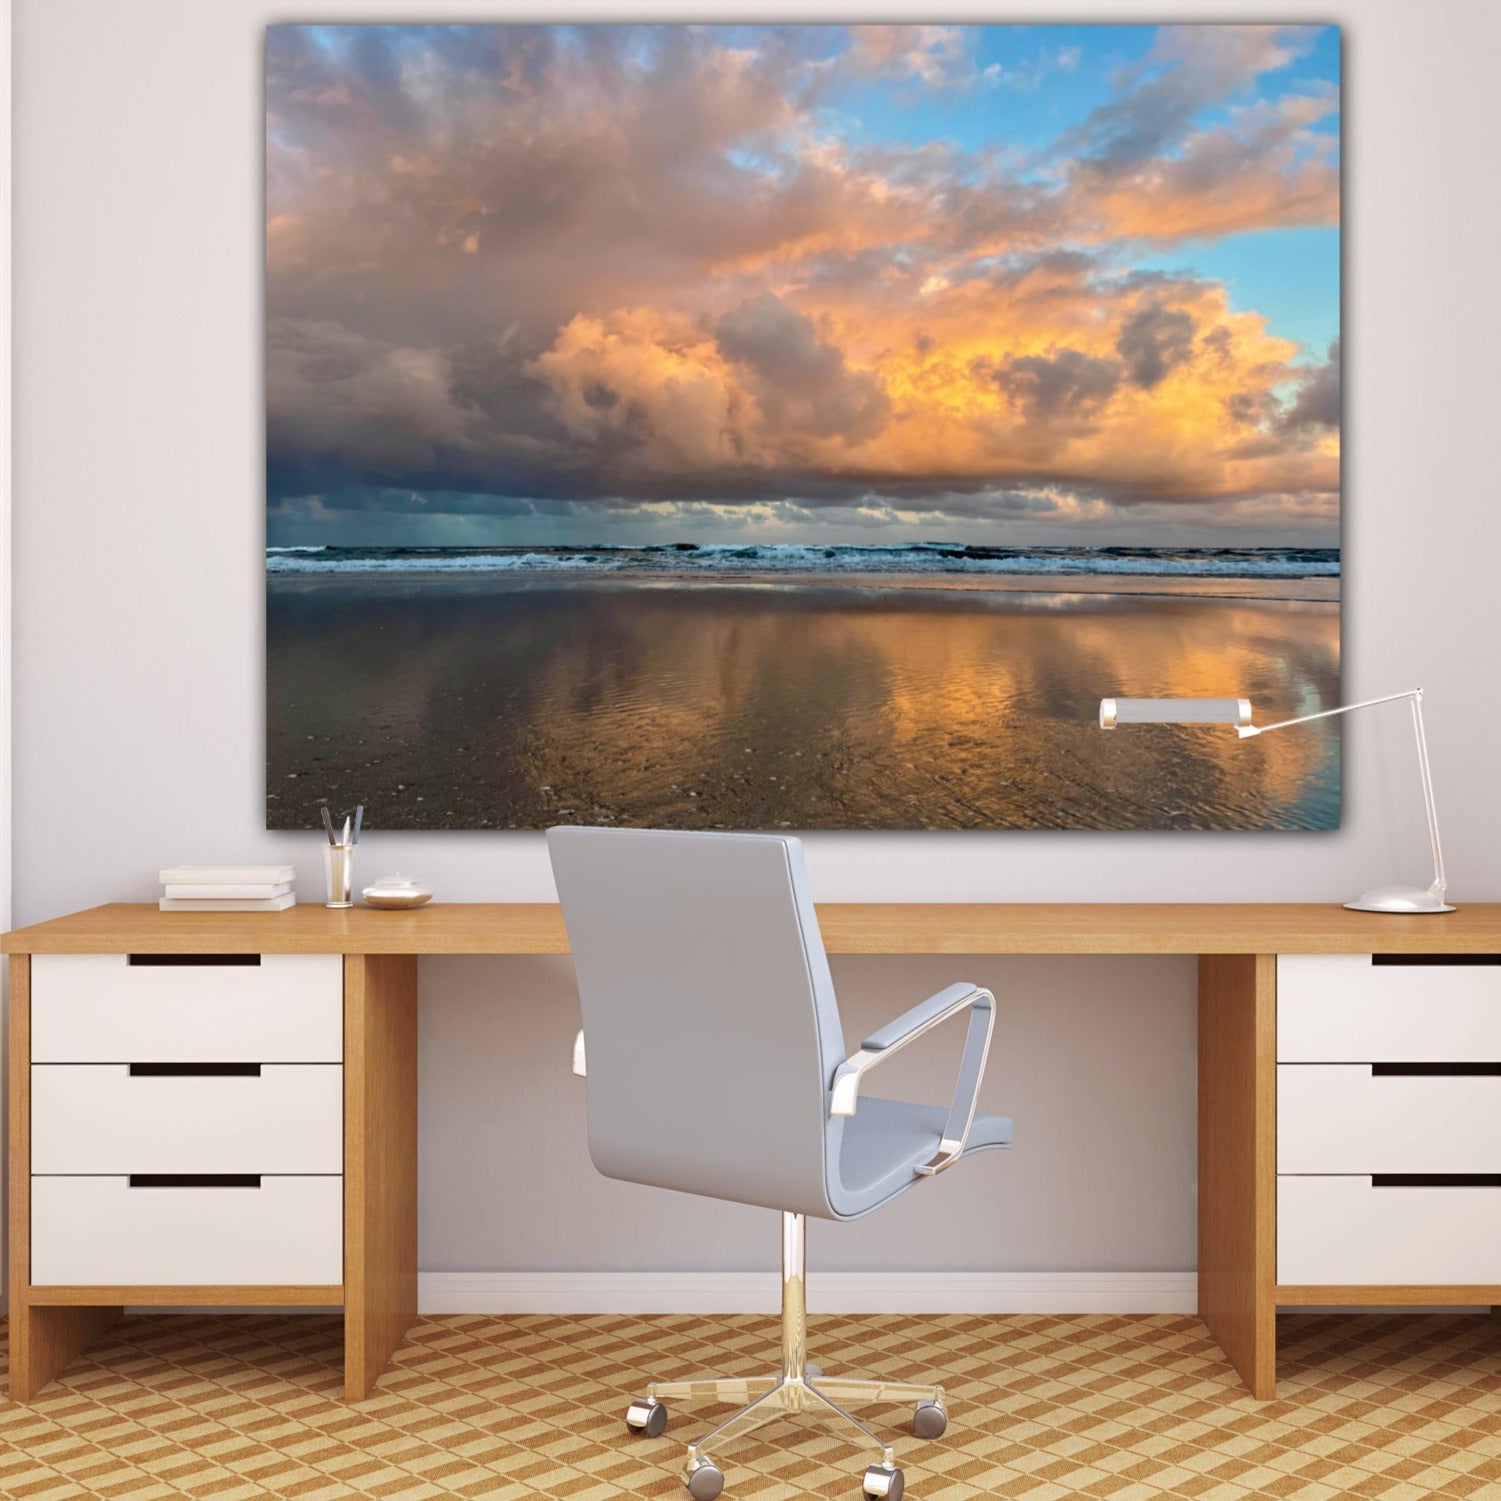 Florida beach sunset canvas print for office by Jacqueline MB Designs 